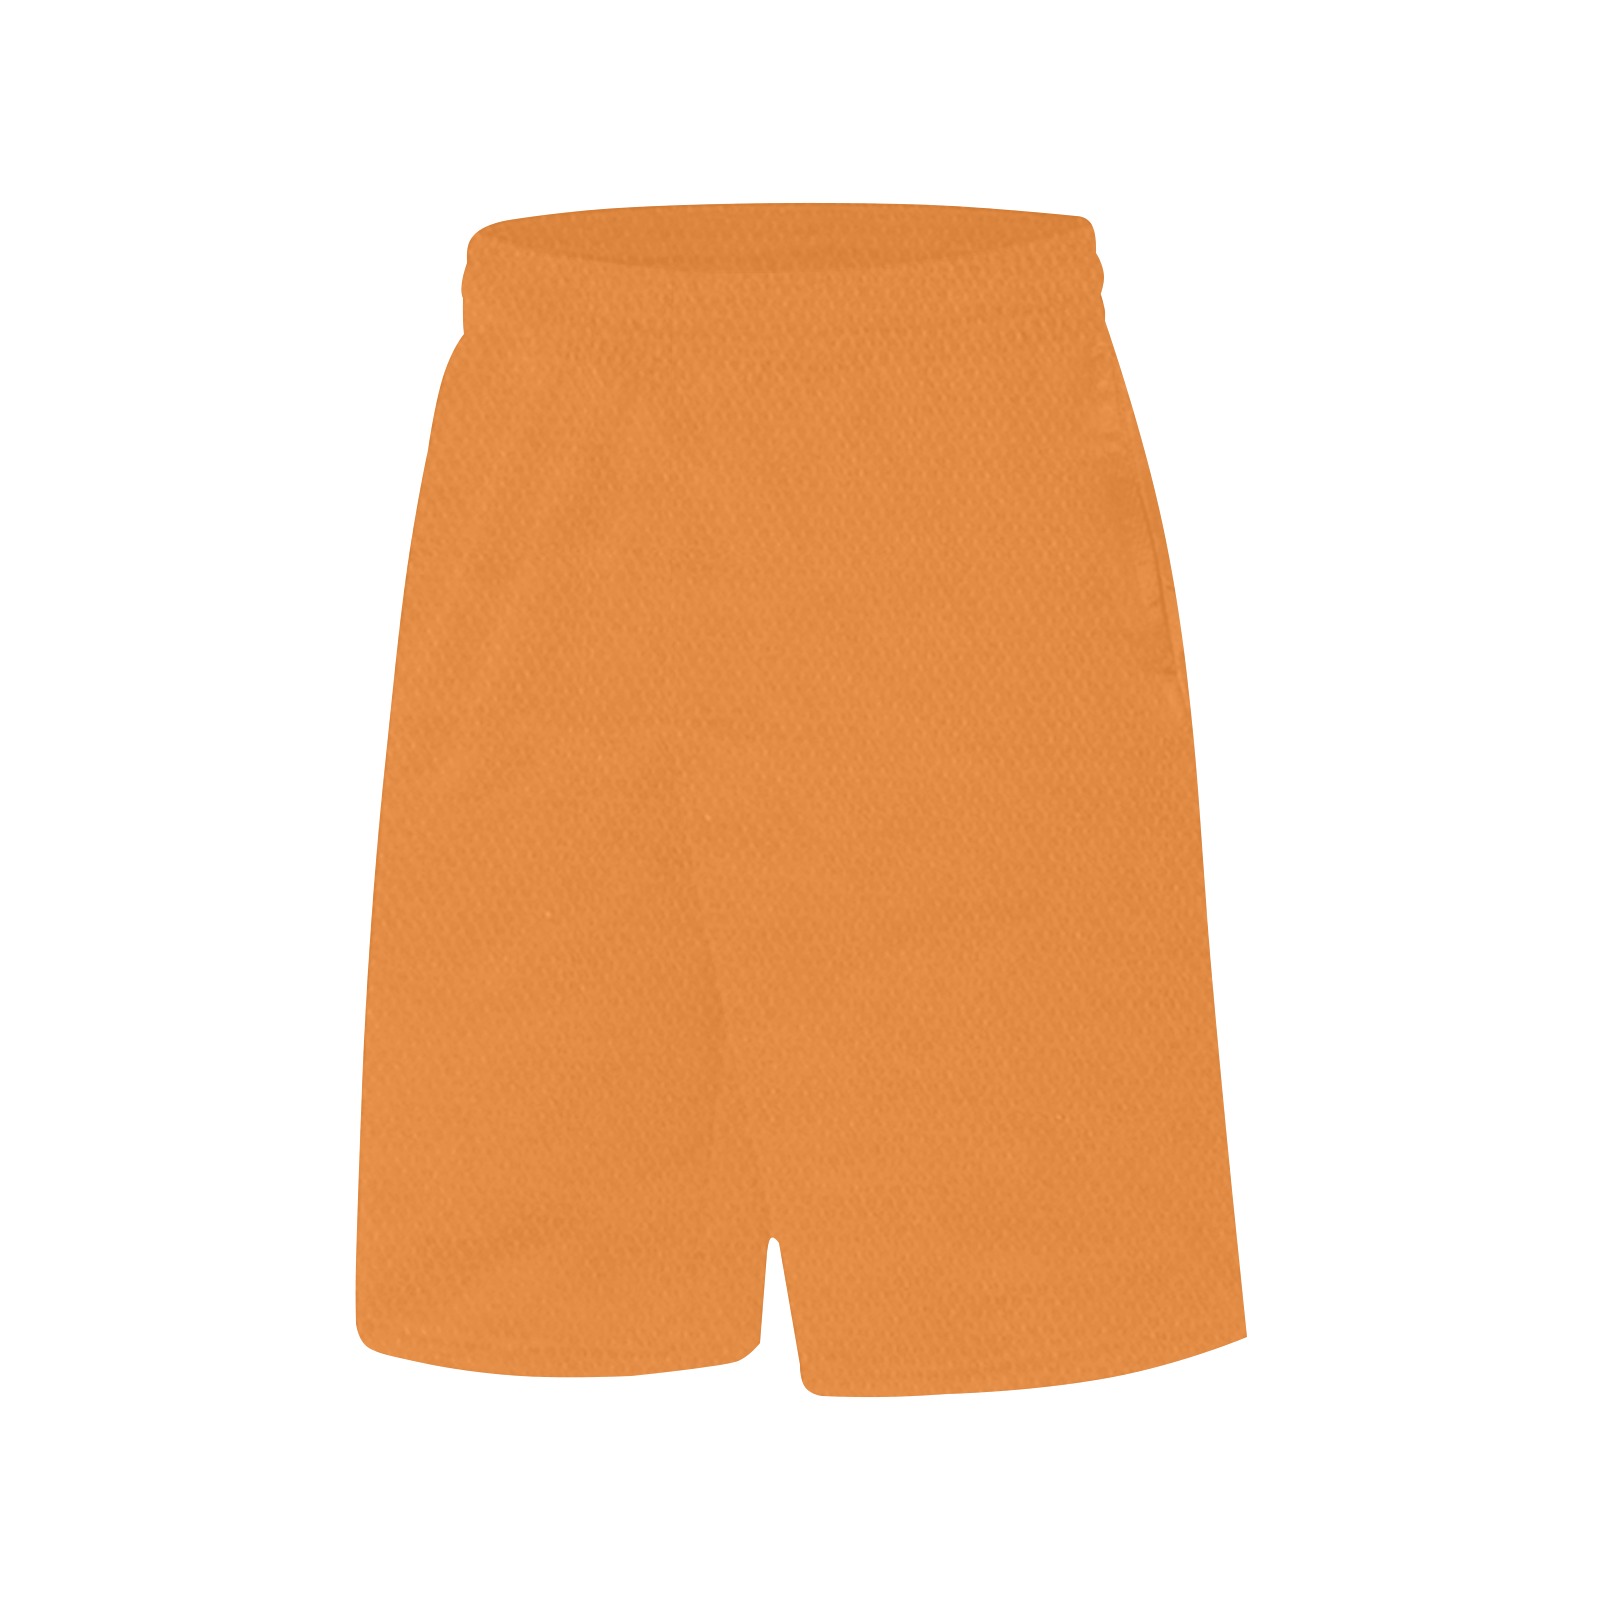 orange All Over Print Basketball Shorts with Pocket